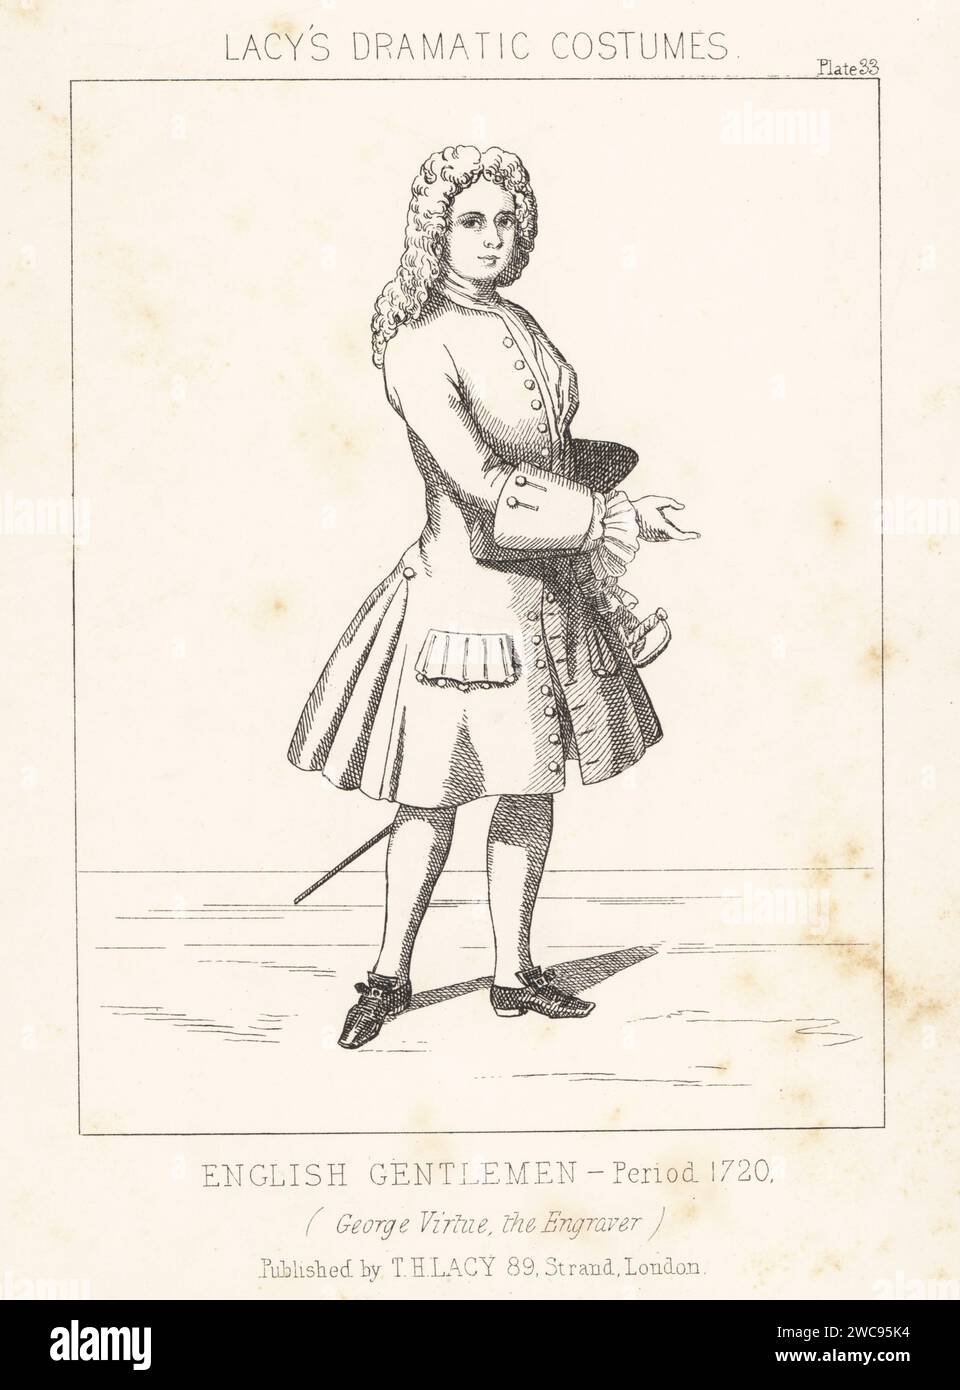 George Virtue, English engraver and antiquary, 1684-1756. In powdered wig, coat with large cuffs and pockets, buckle shoes, with sword and tricorne. In the costume of an English gentleman, circa 1720. Lithograph from Thomas Hailes Lacy's Male Costumes, Historical, National and Dramatic in 200 Plates, London, 1865. Lacy (1809-1873) was a British actor, playwright, theatrical manager and publisher. Stock Photo